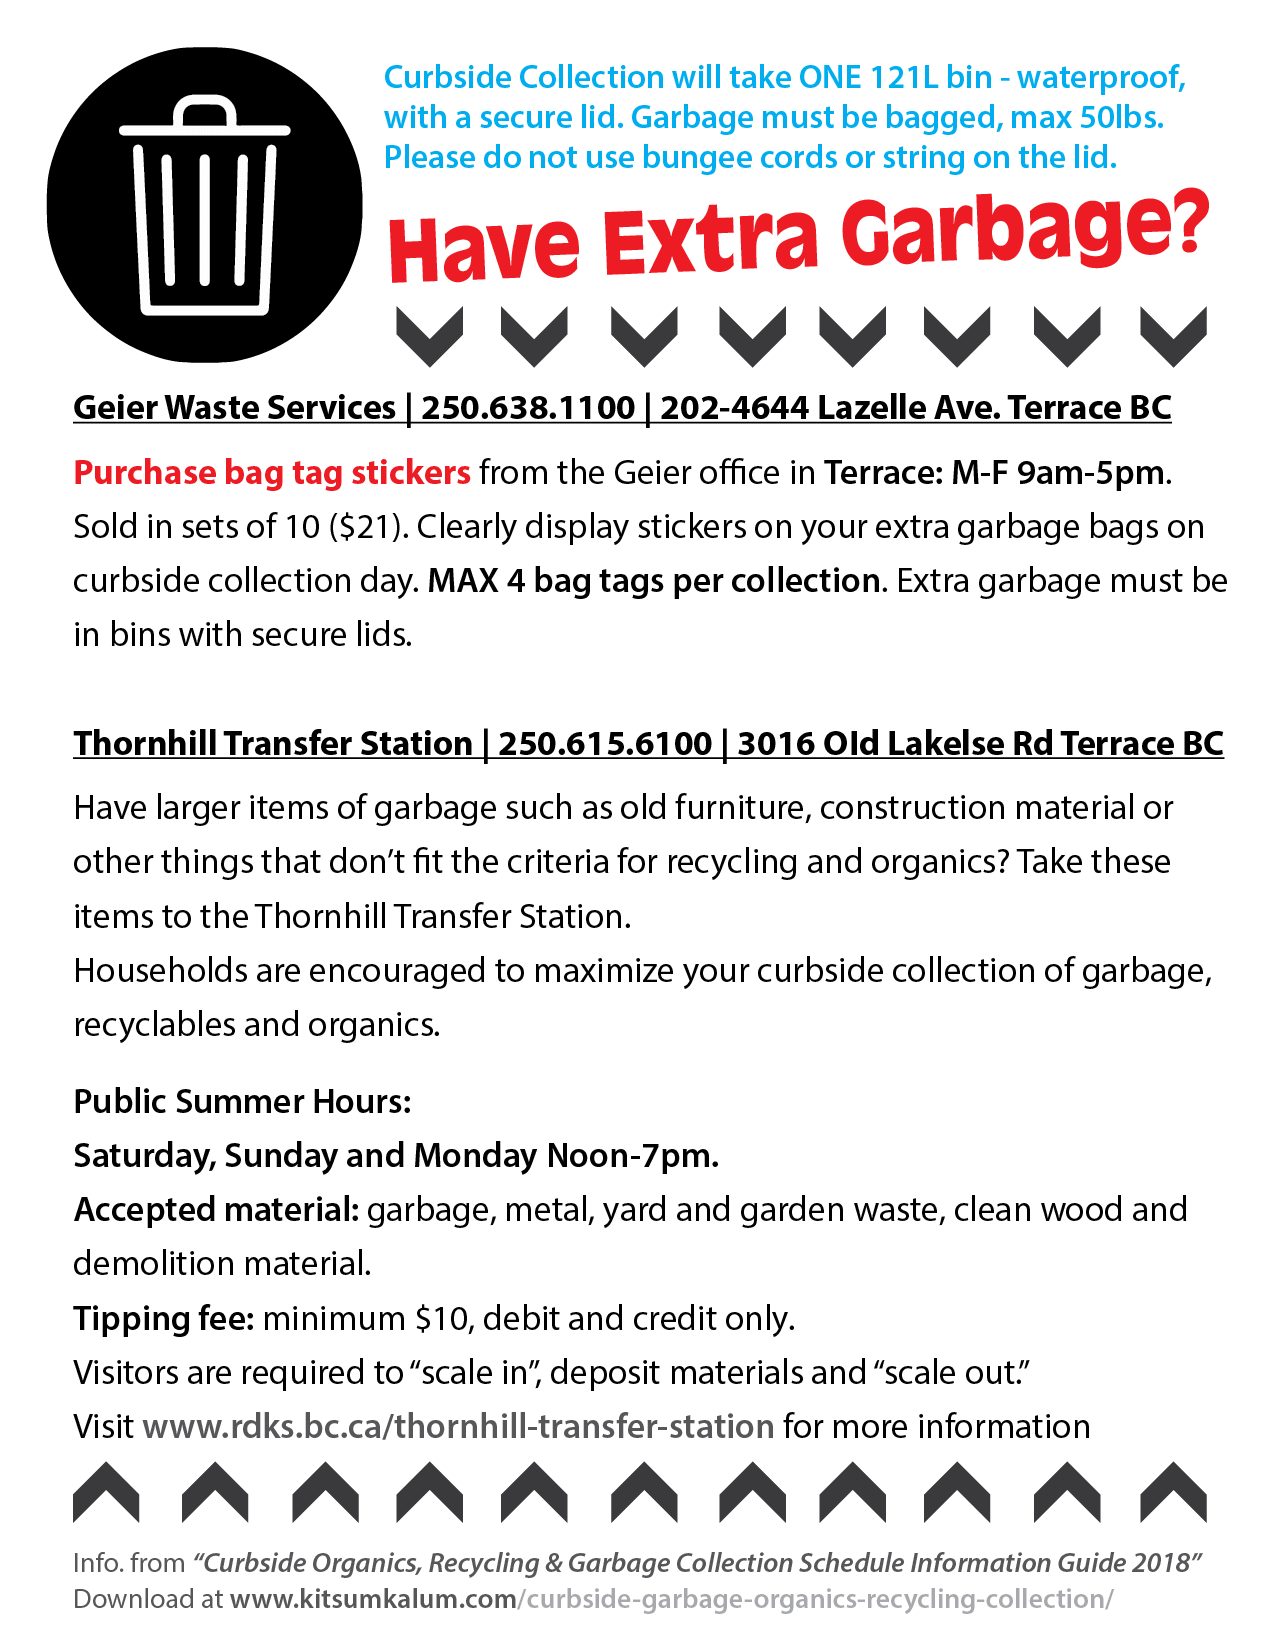 Have Extra Garbage?